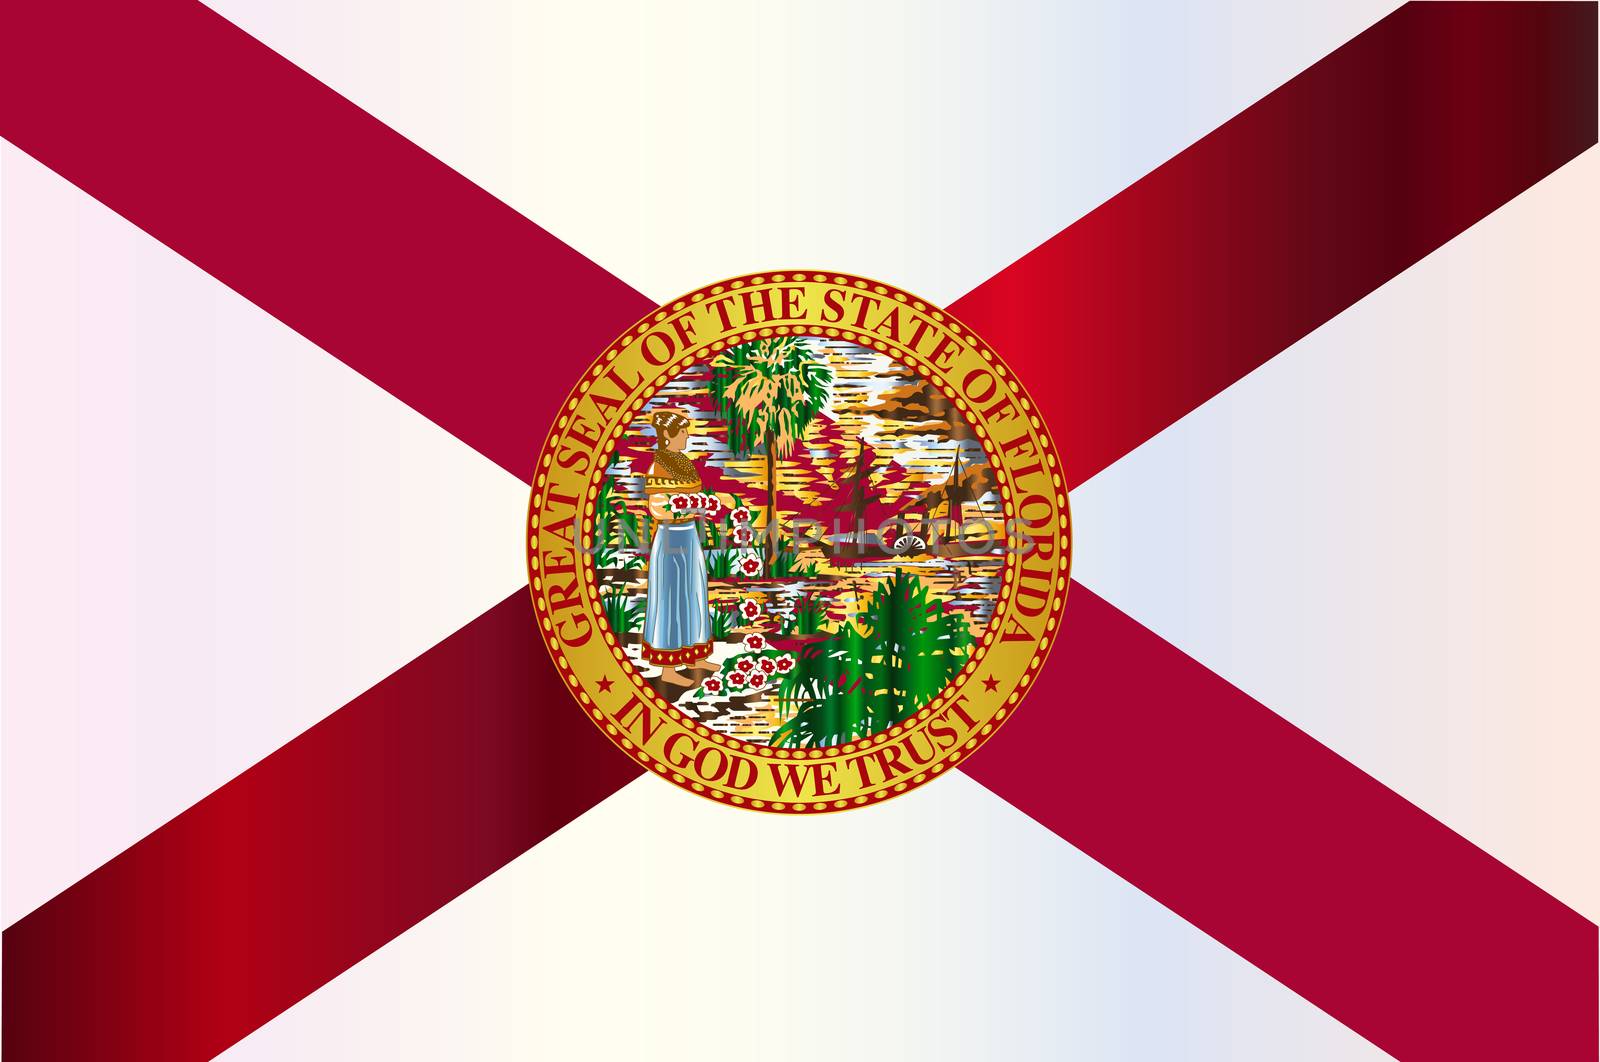 The flag of the USA state of Florida